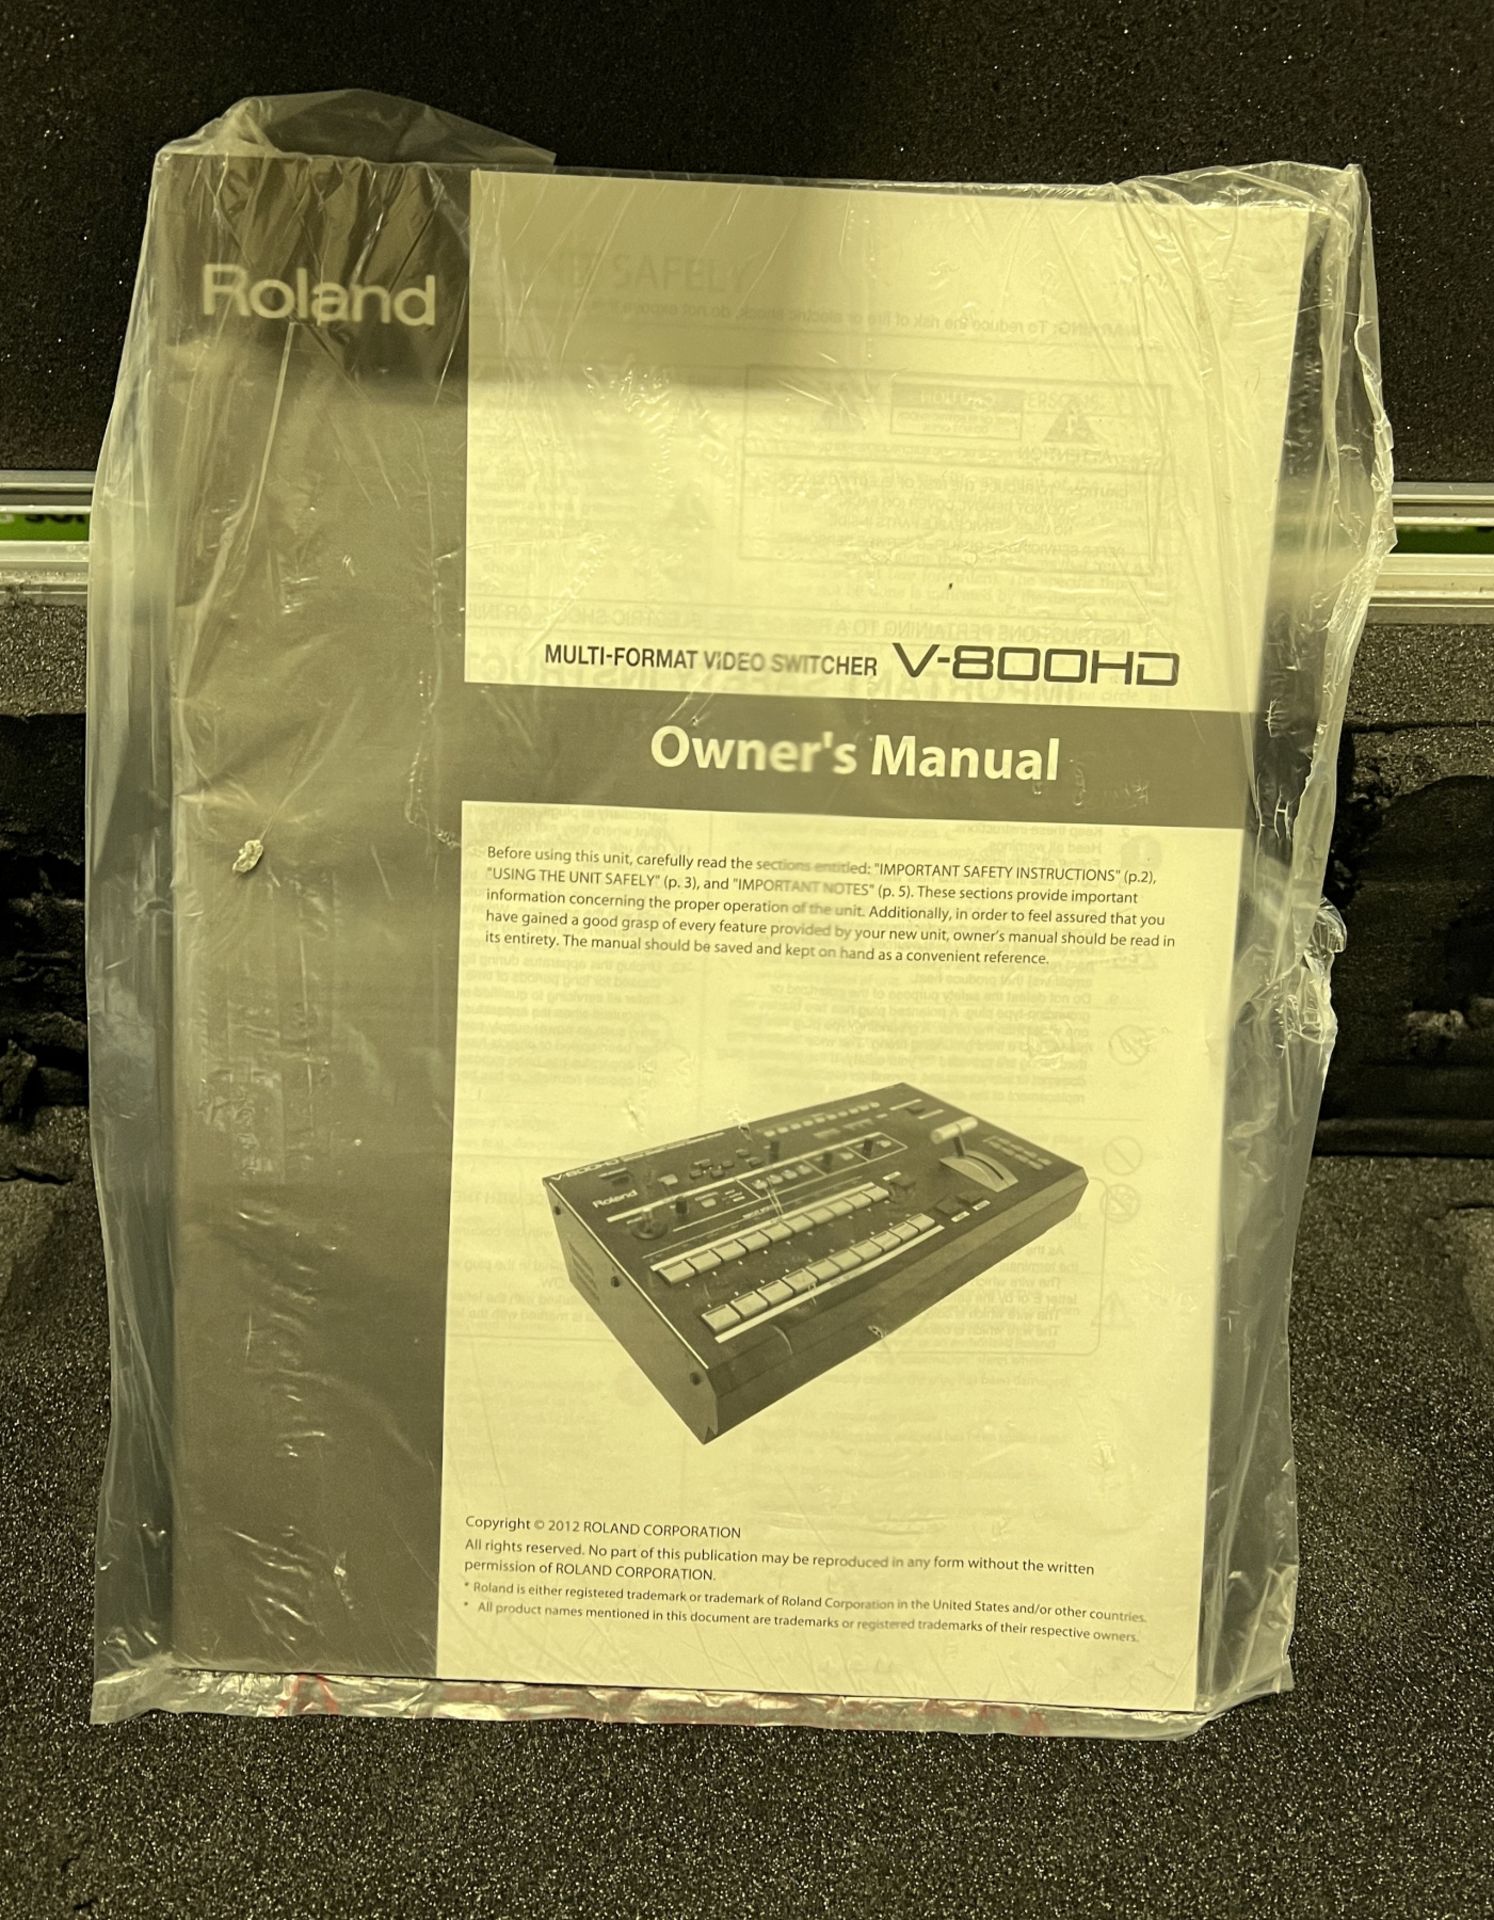 Roland V800HD vision mixer in flight case - case dimensions: L 690 x W 370 x H 230mm - FAULTY OUTPUT - Image 8 of 10